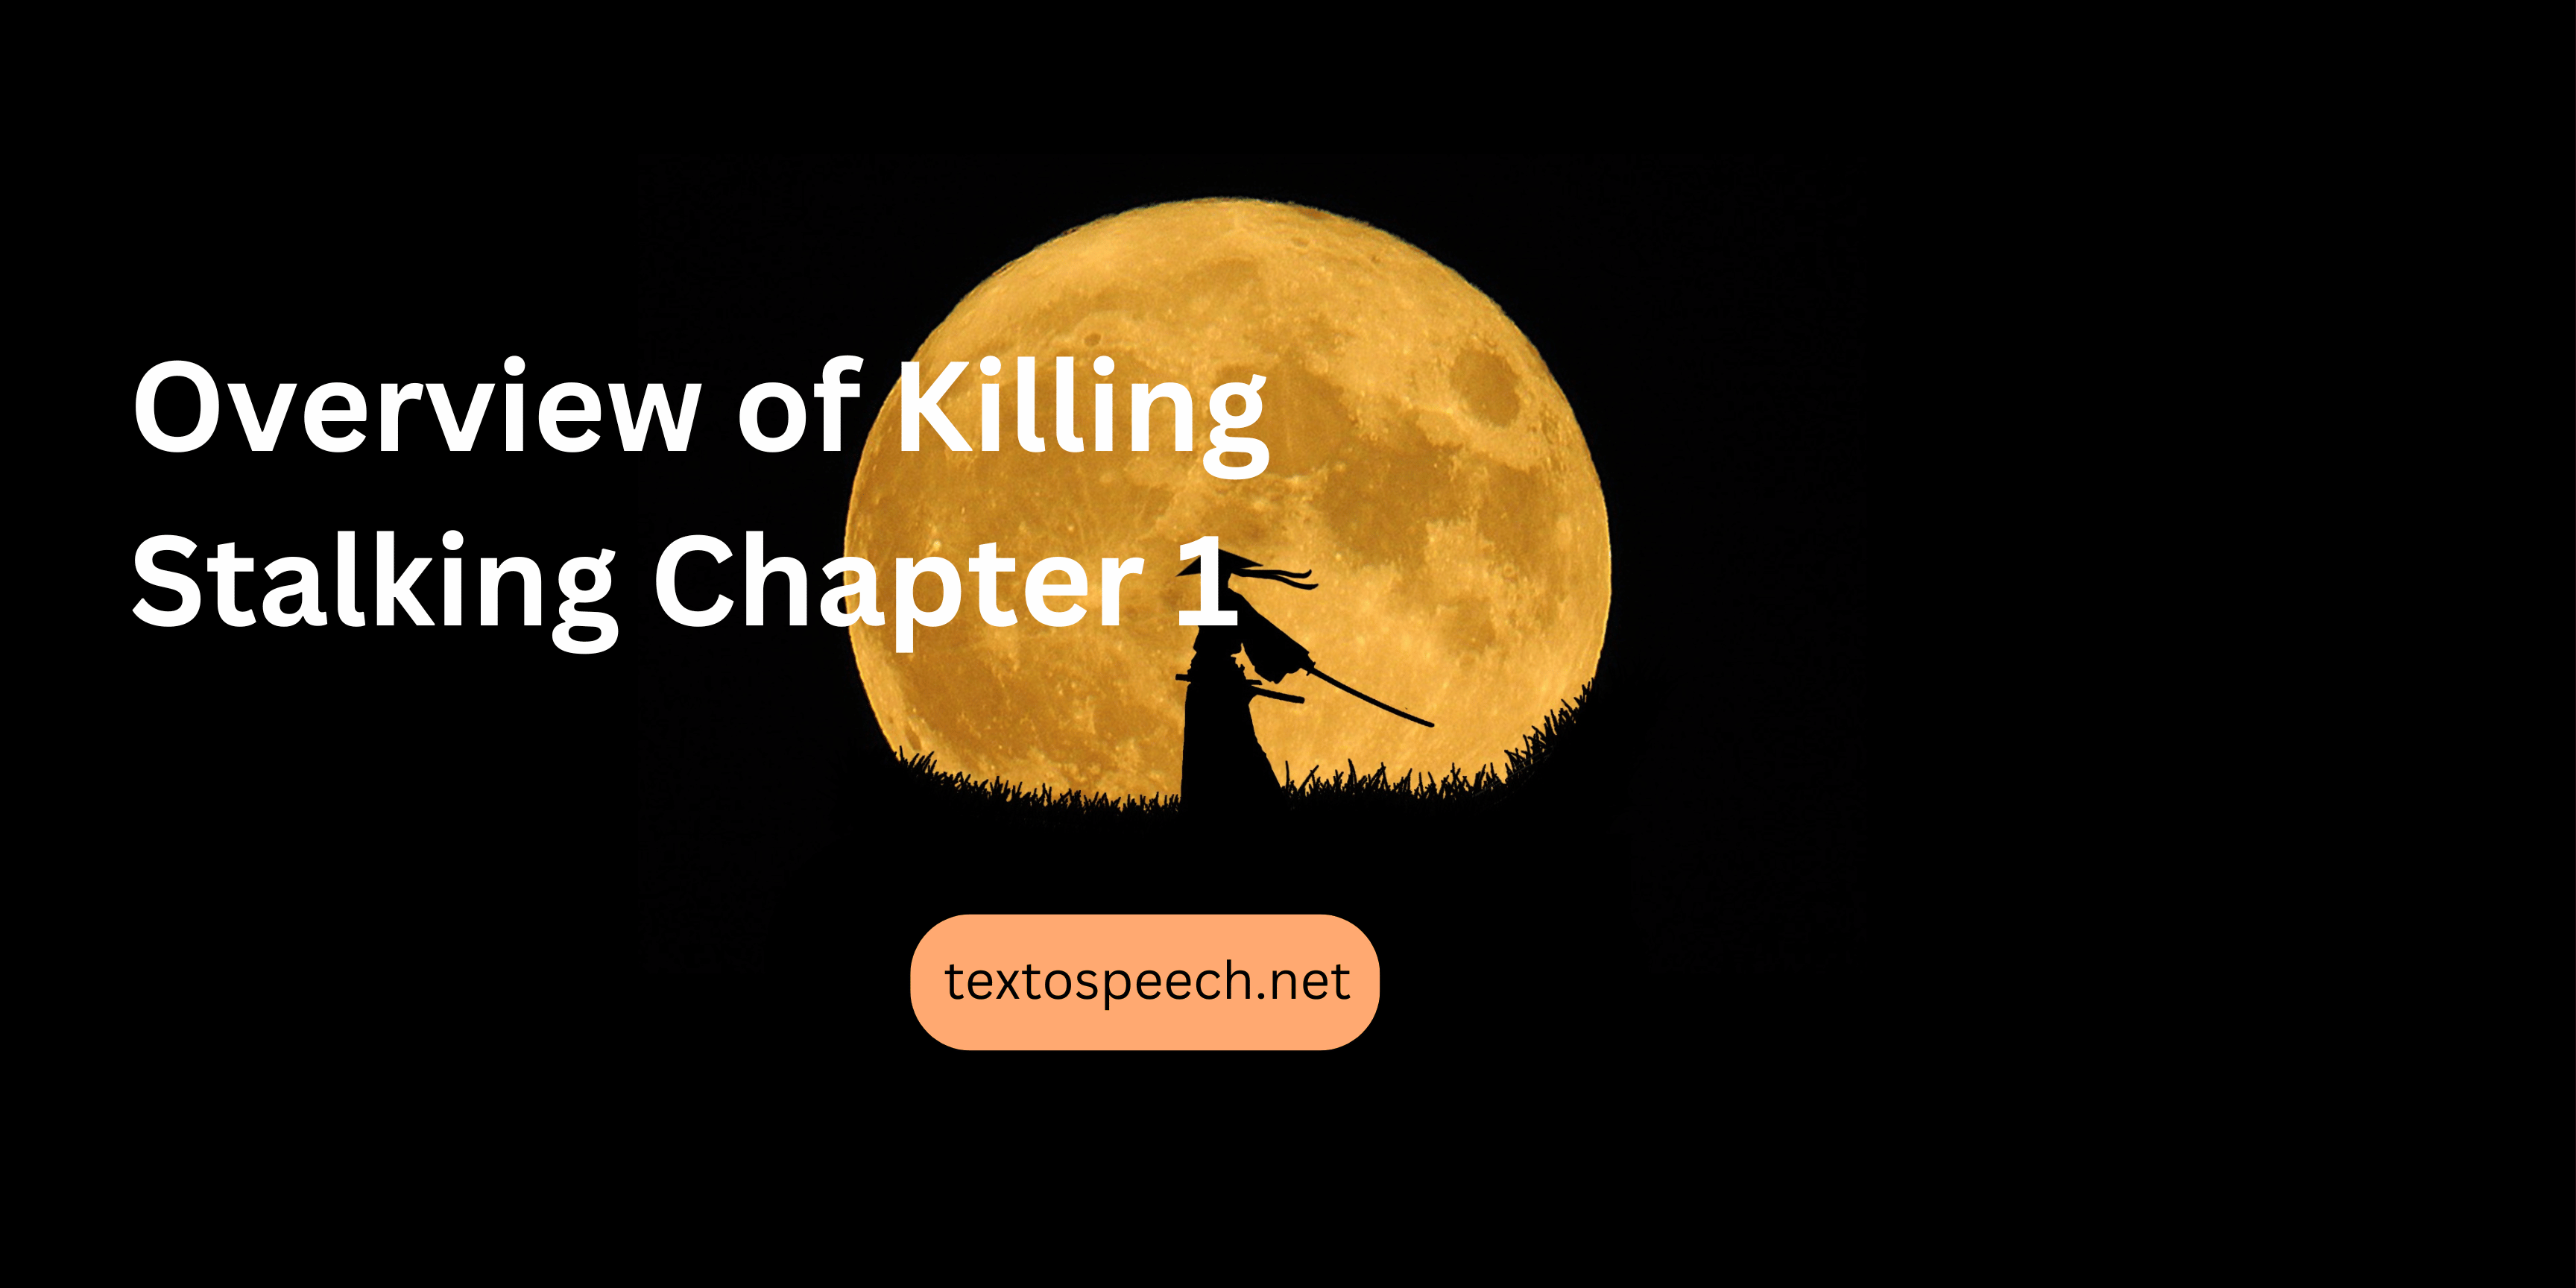 Overview of Killing Stalking Chapter 1